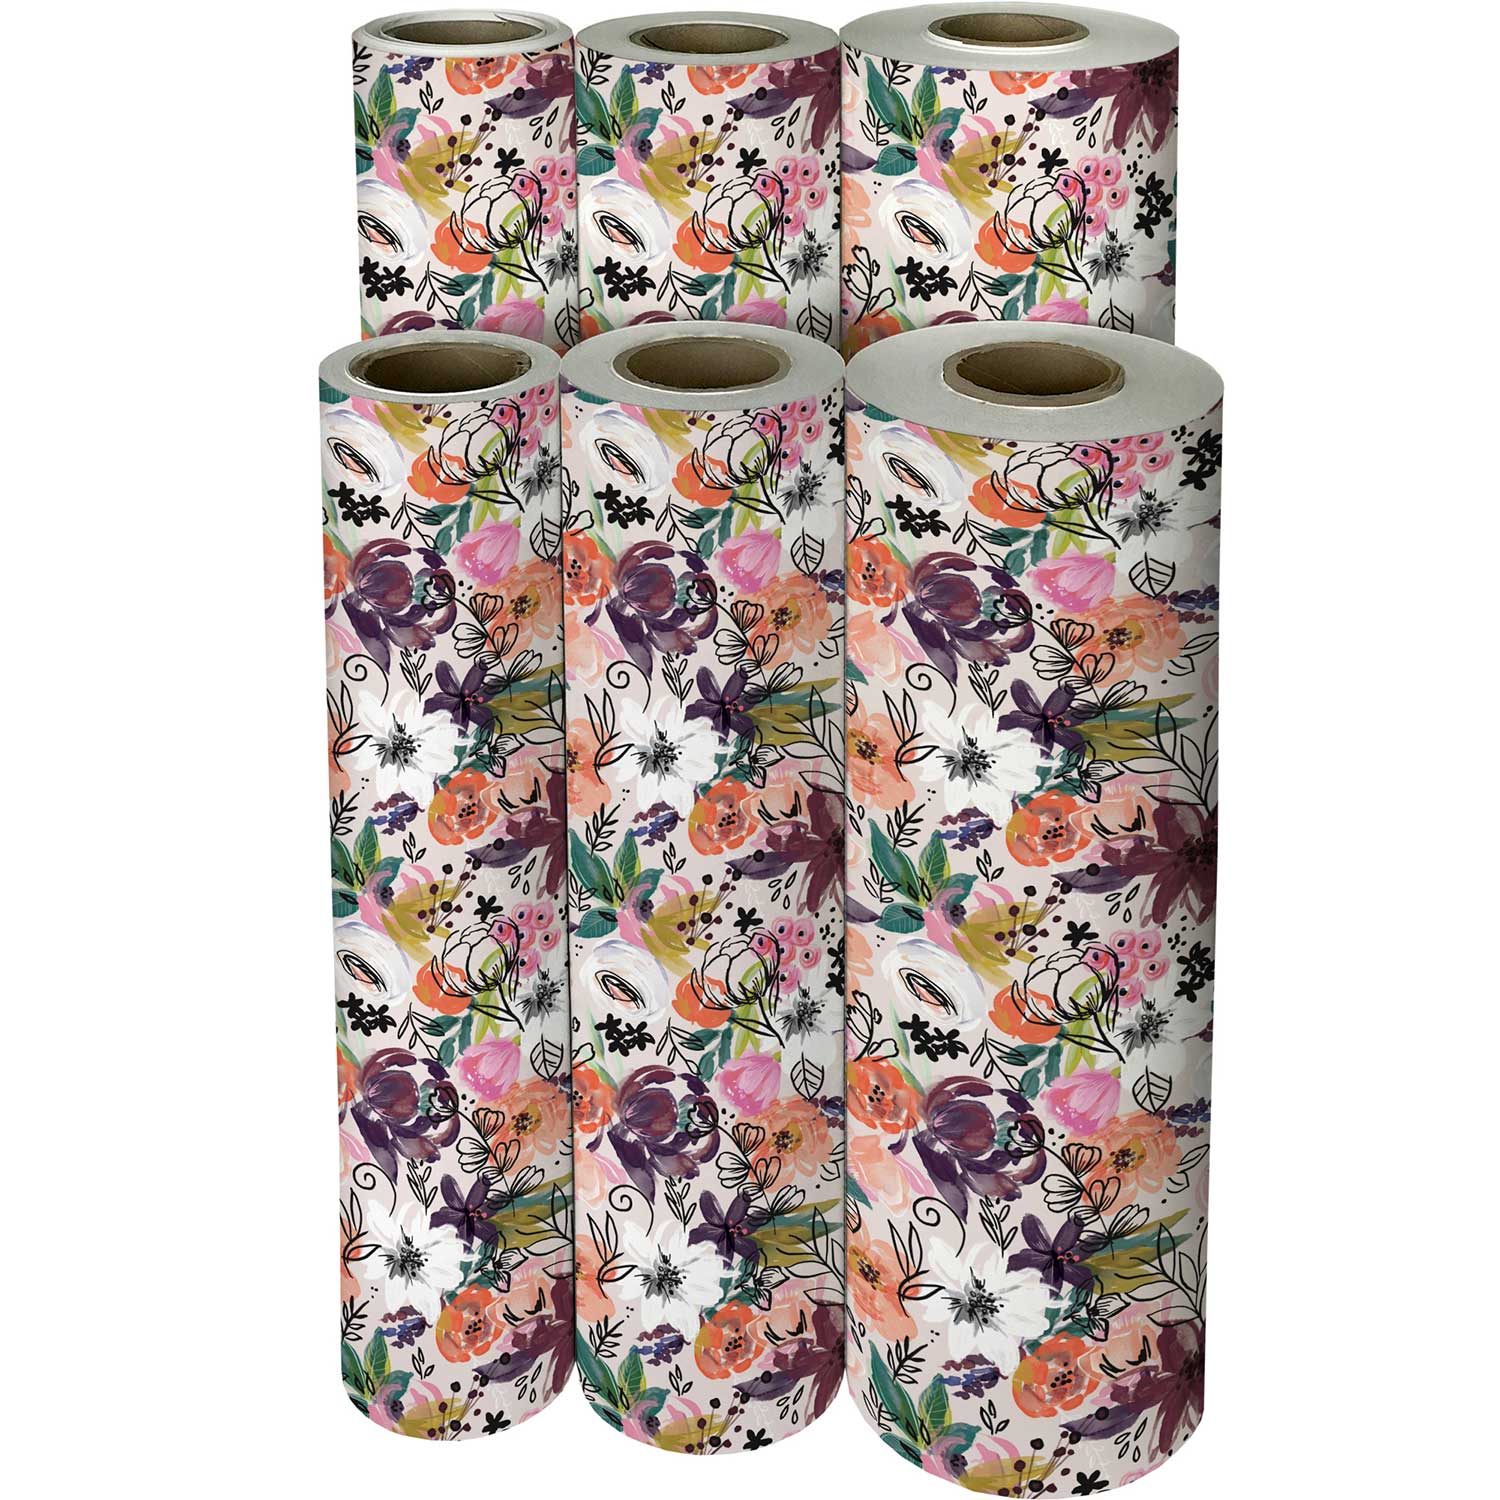 Twig & Twine Floral Gift Wrap 1/2 Ream 417 ft x 30 in